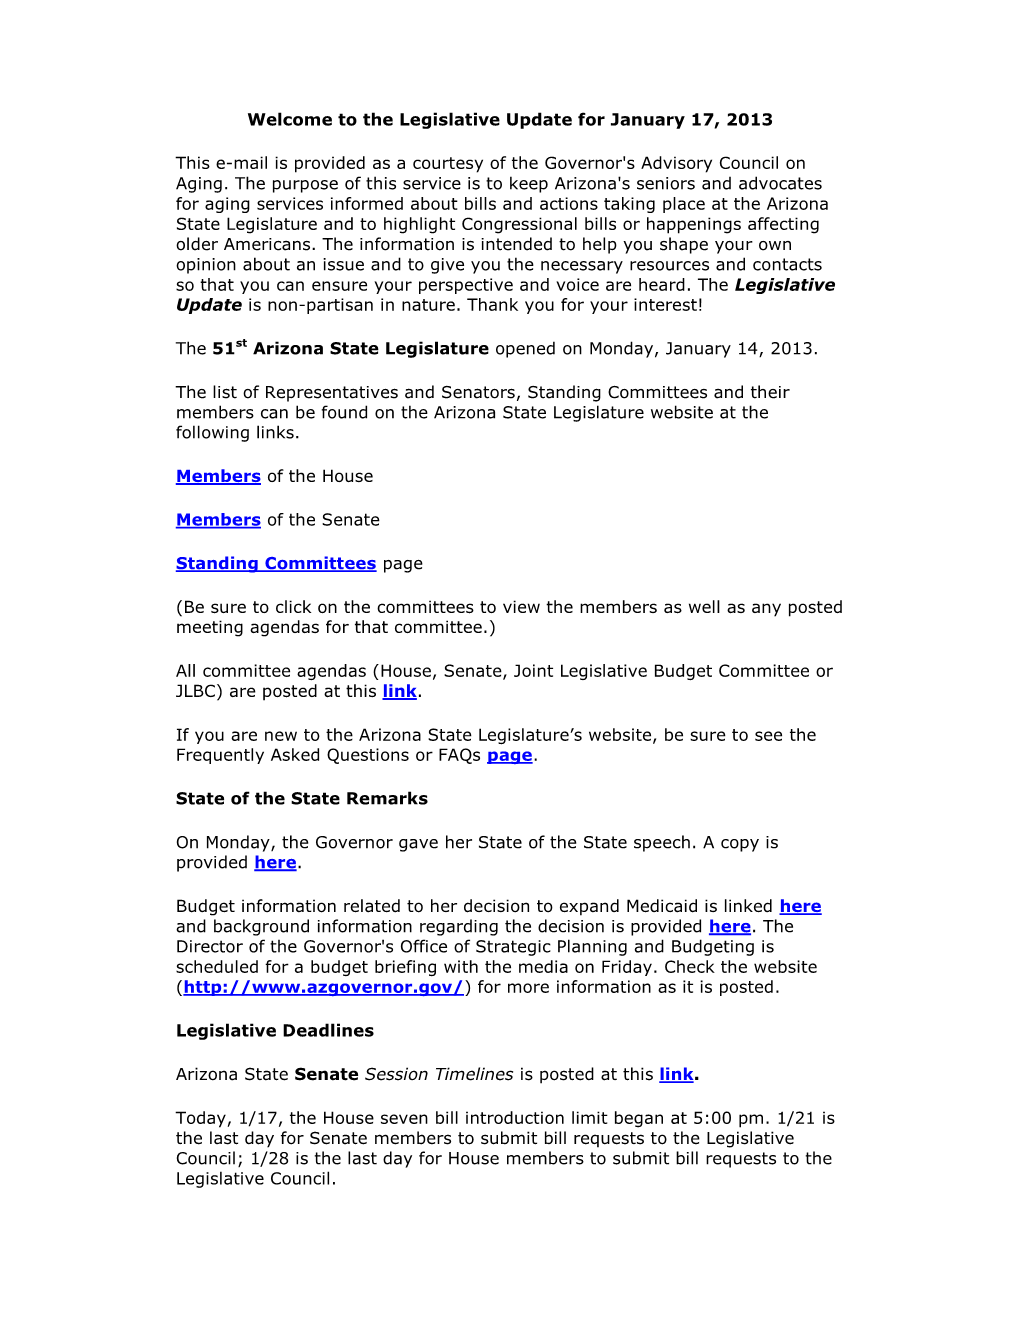 The Legislative Update for January 17, 2013 This E-Mail Is Provided As A